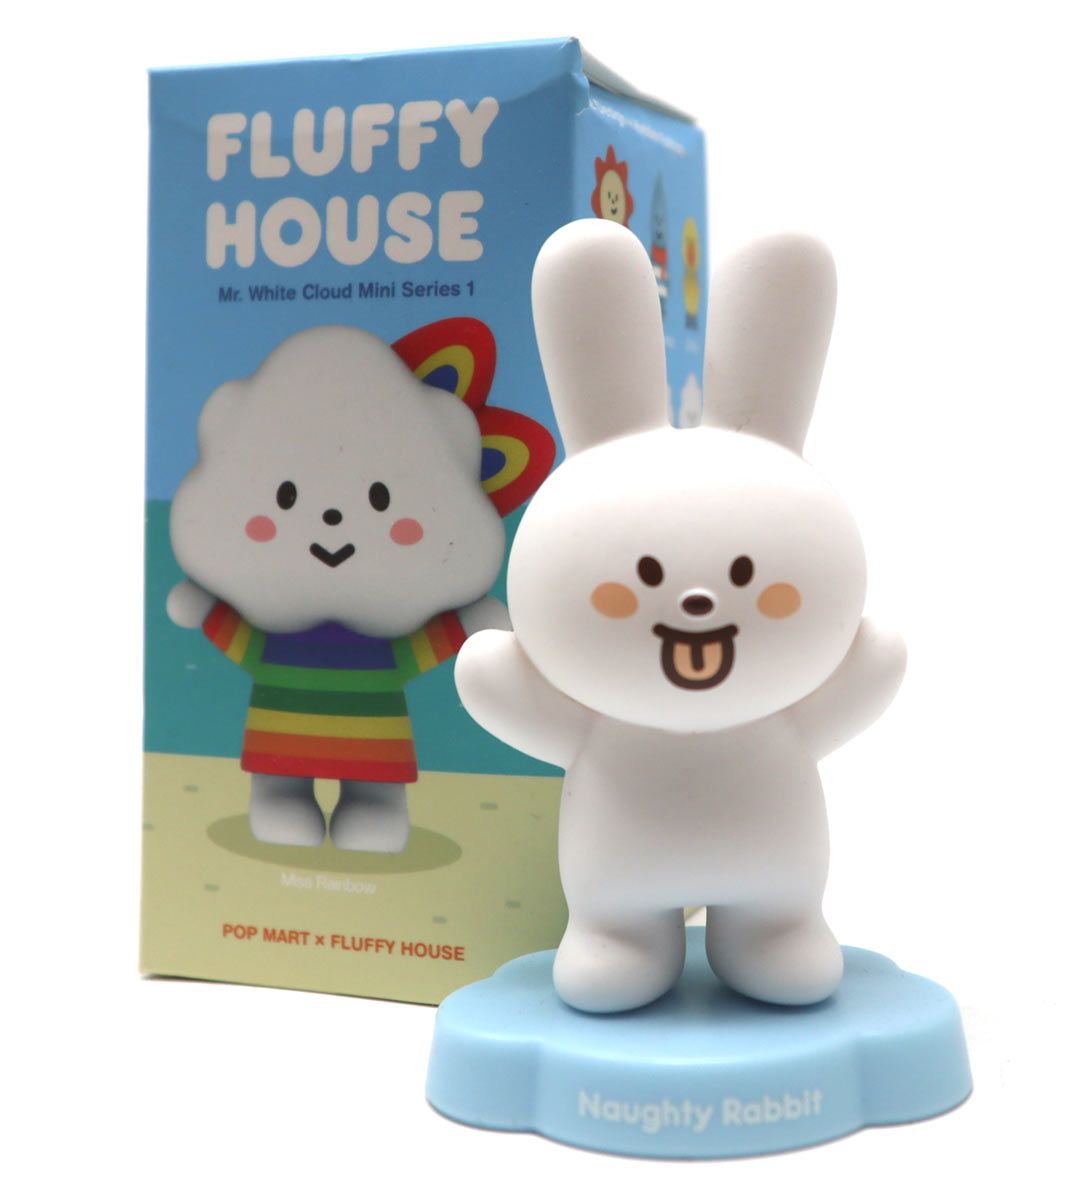 Mr. White Cloud Let's Be Friends - Fluffy House